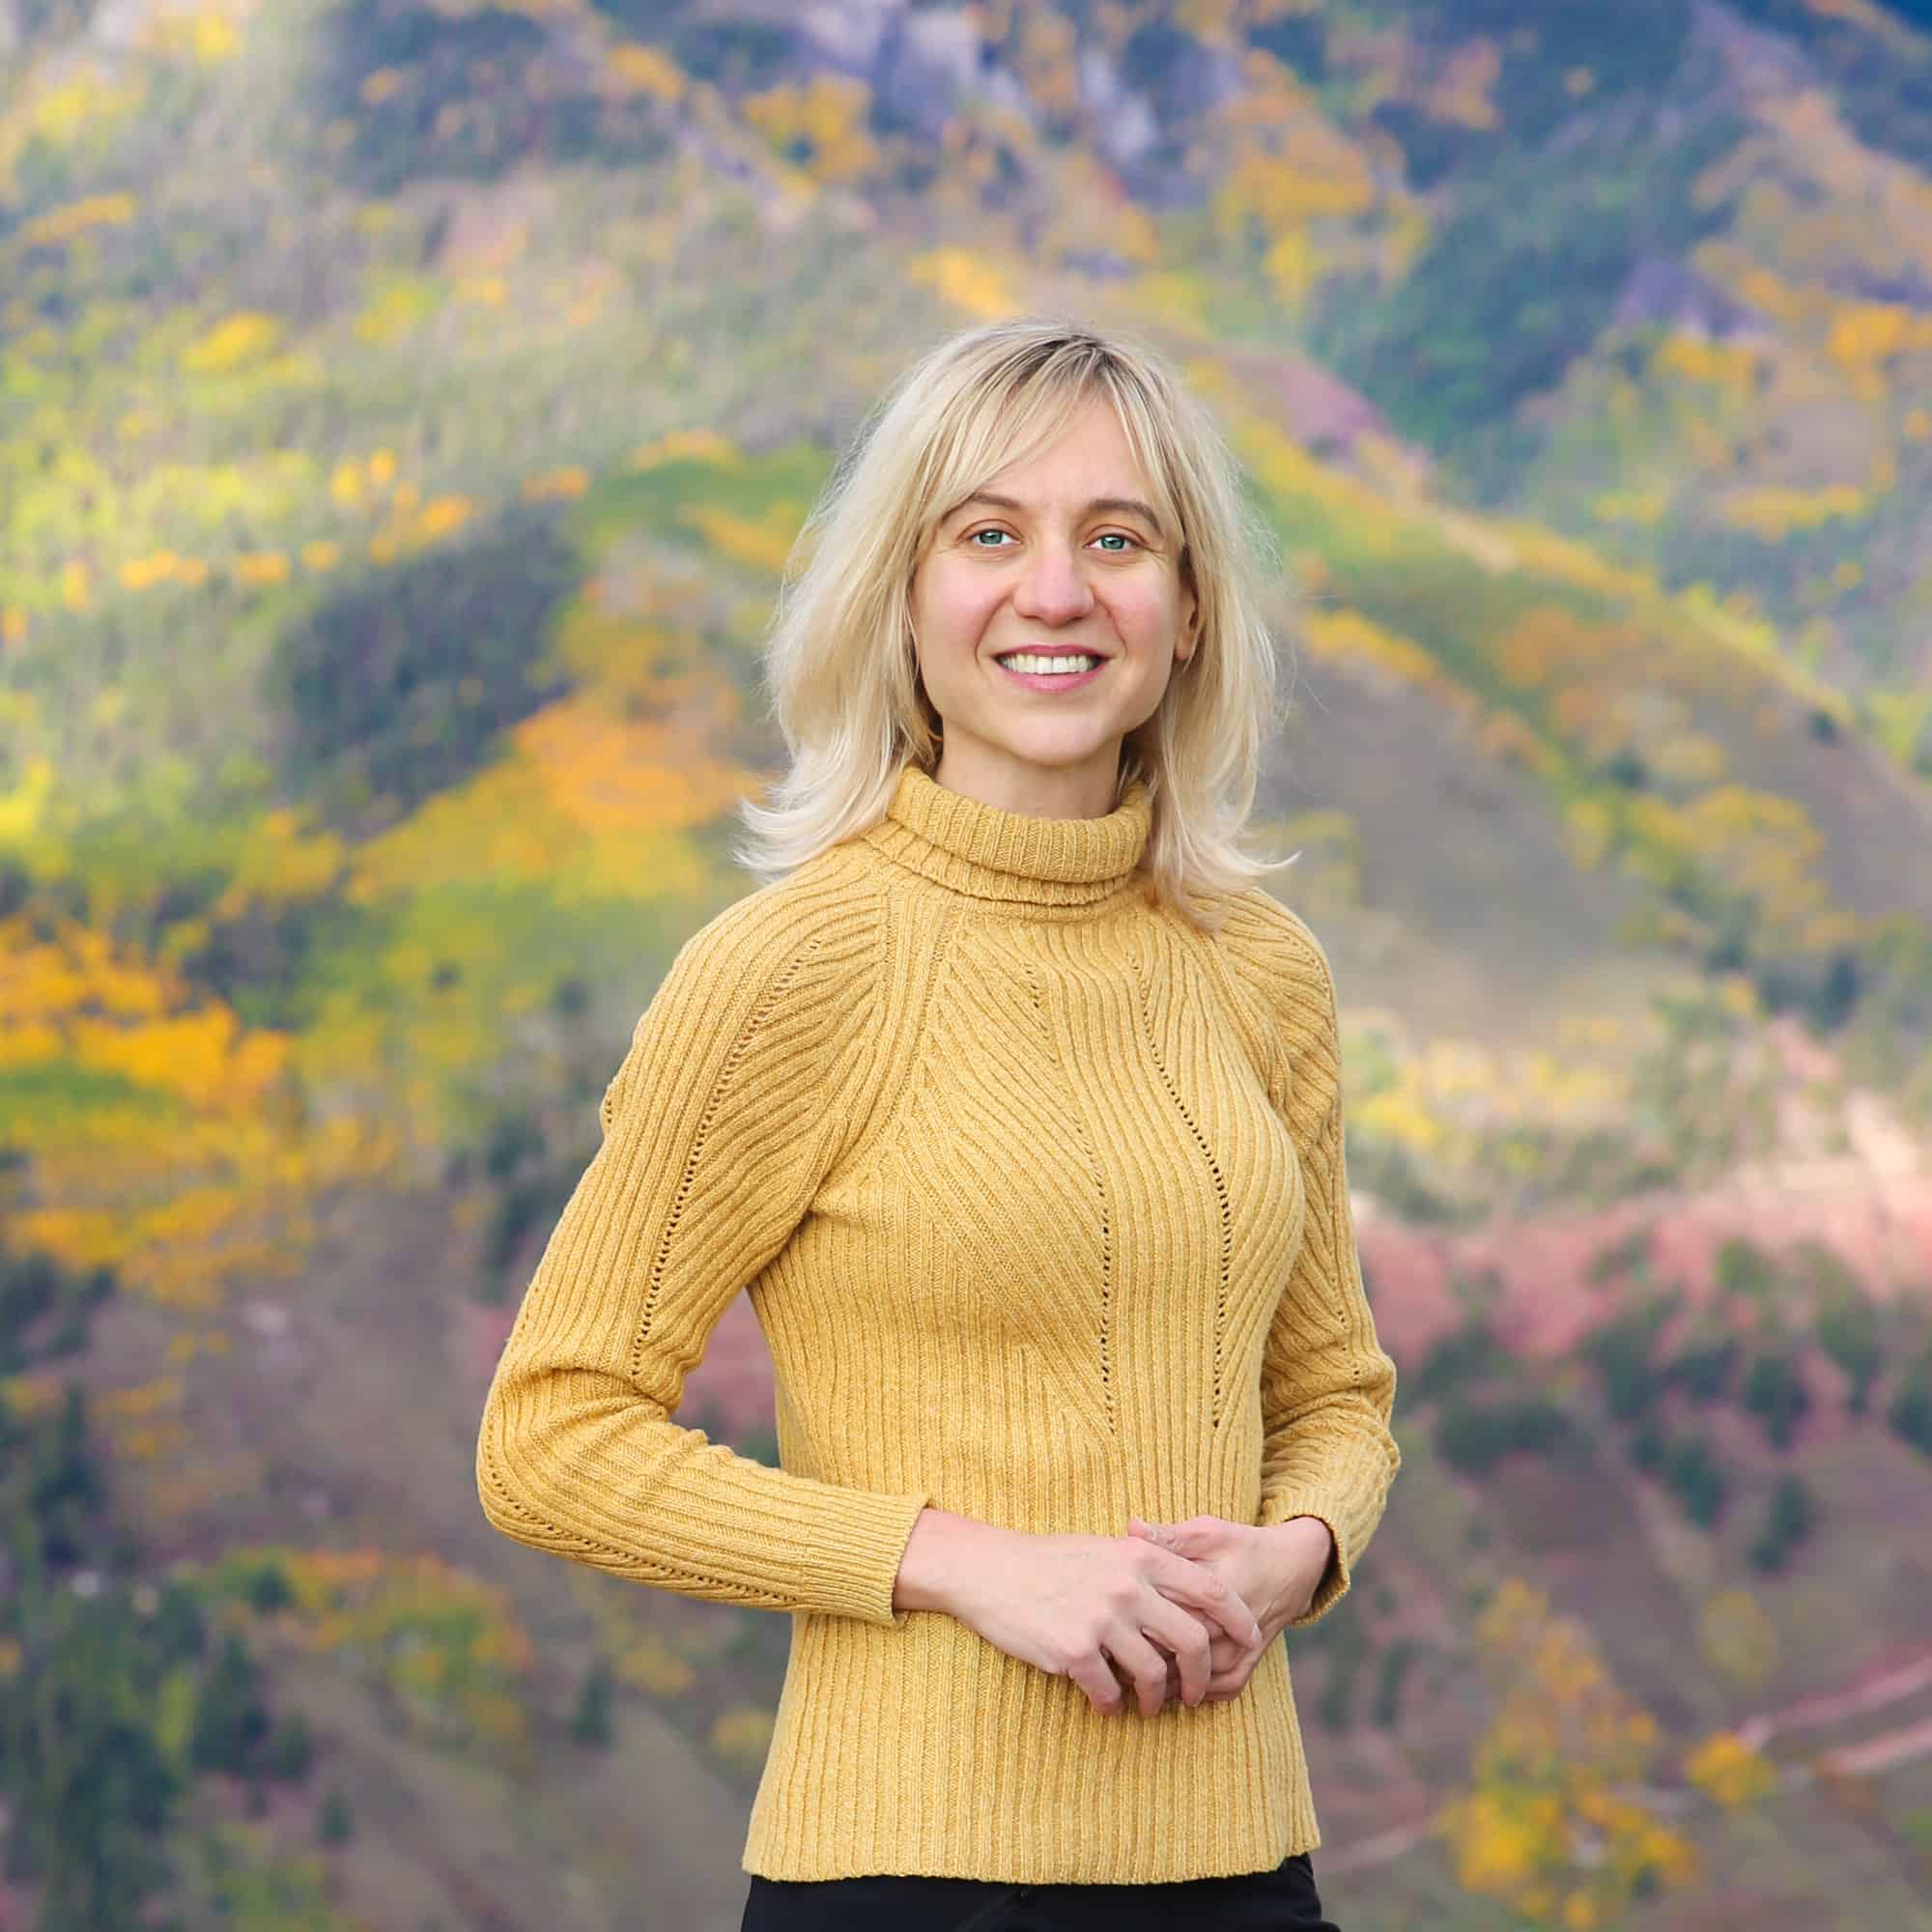 Photo of Julia (the content creator behind this website) in yellow sweater against the Autumn background.